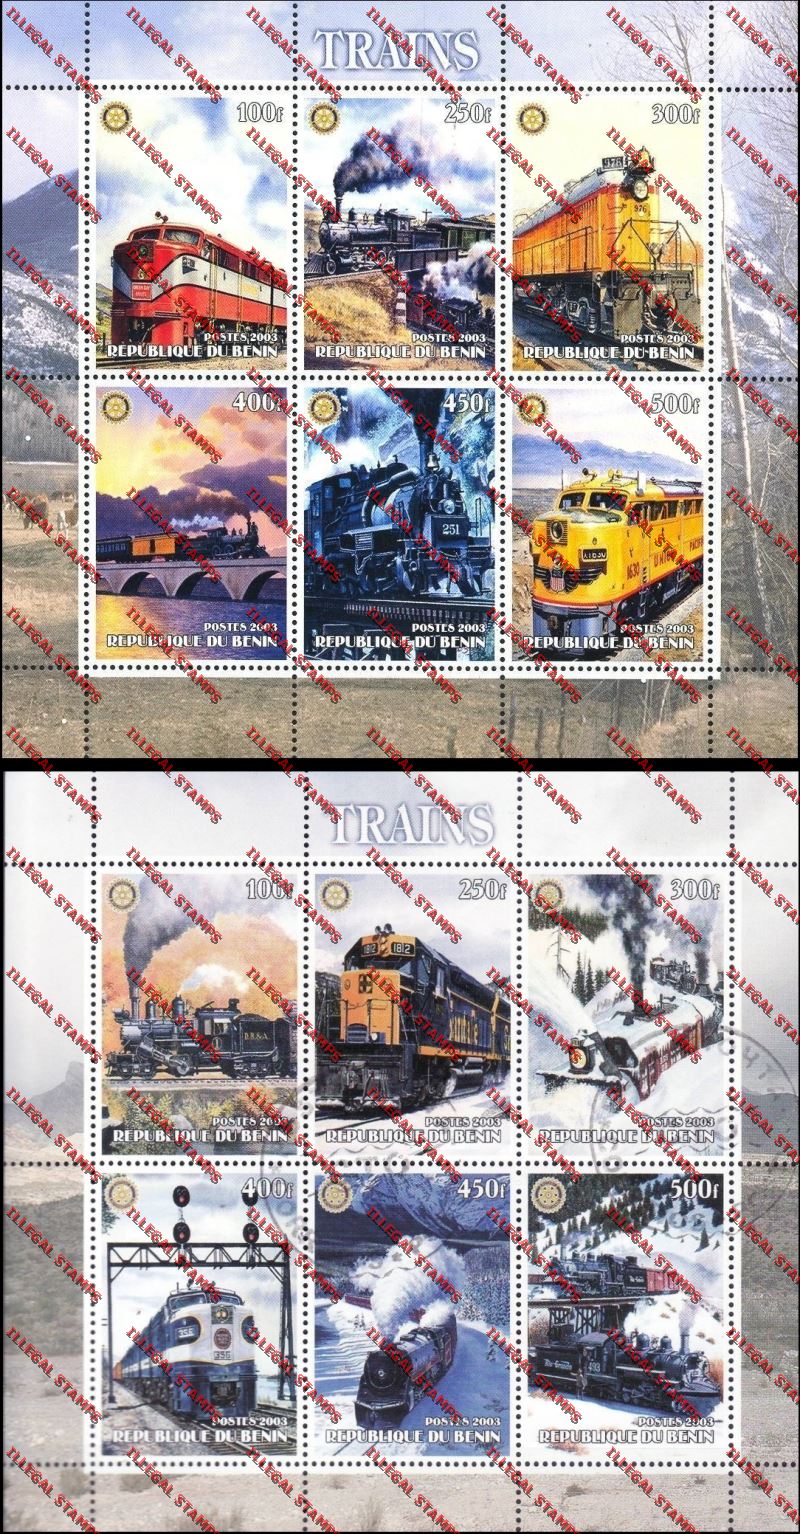 Benin 2003 Trains with Rotary International Emblem Illegal Stamp Sheetlets of Six